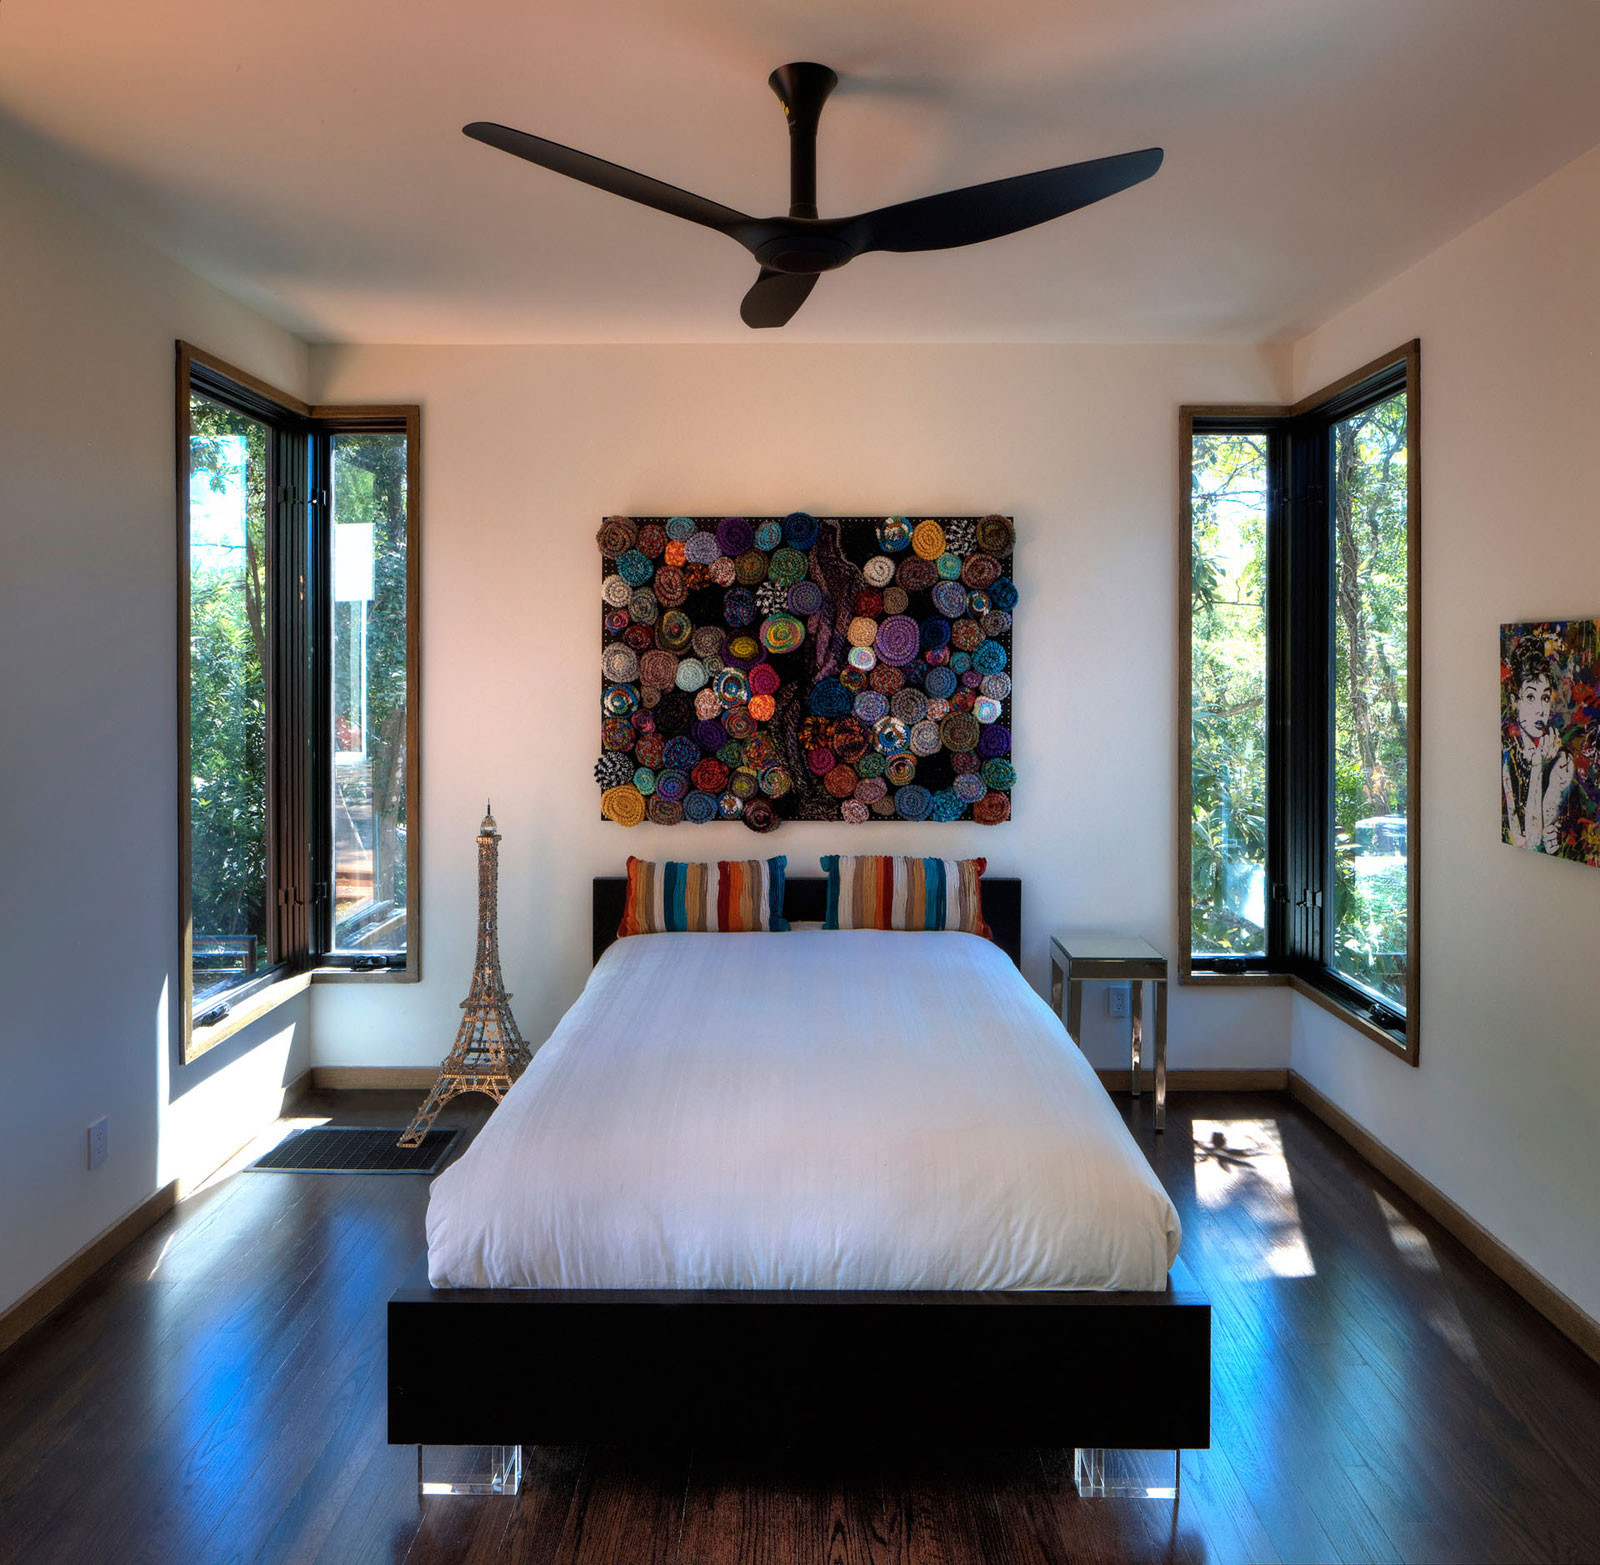 Modern Bedroom Ceiling Fans
 Modern Ceiling Fans in Contemporary Style Amaza Design